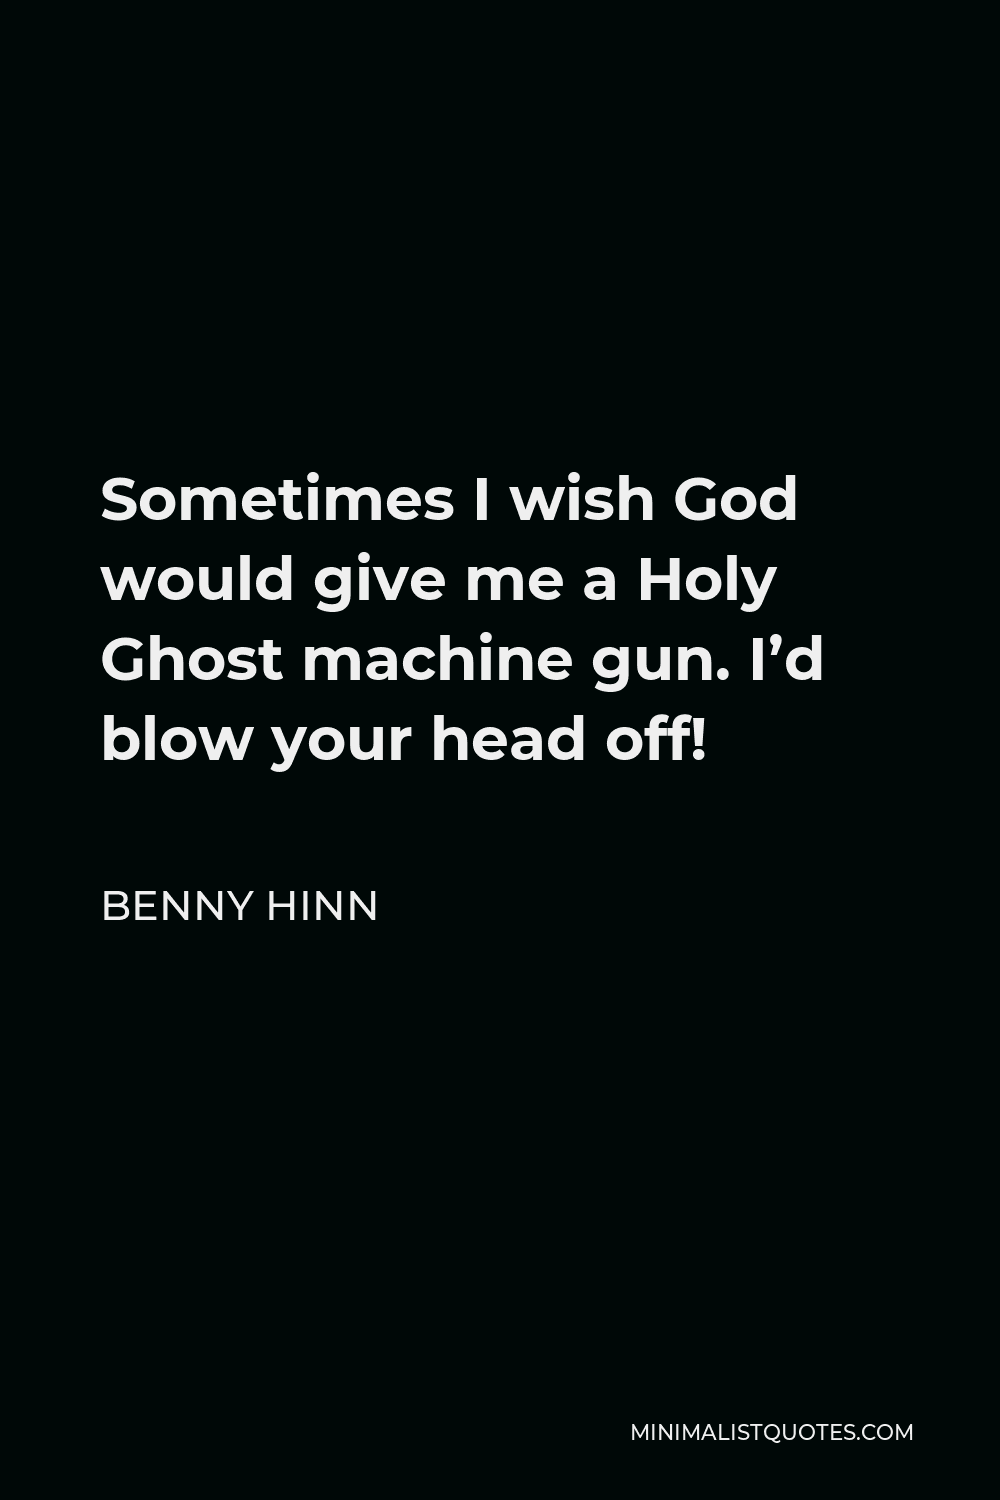 Benny Hinn Quote - Sometimes I wish God would give me a Holy Ghost machine gun. I’d blow your head off!